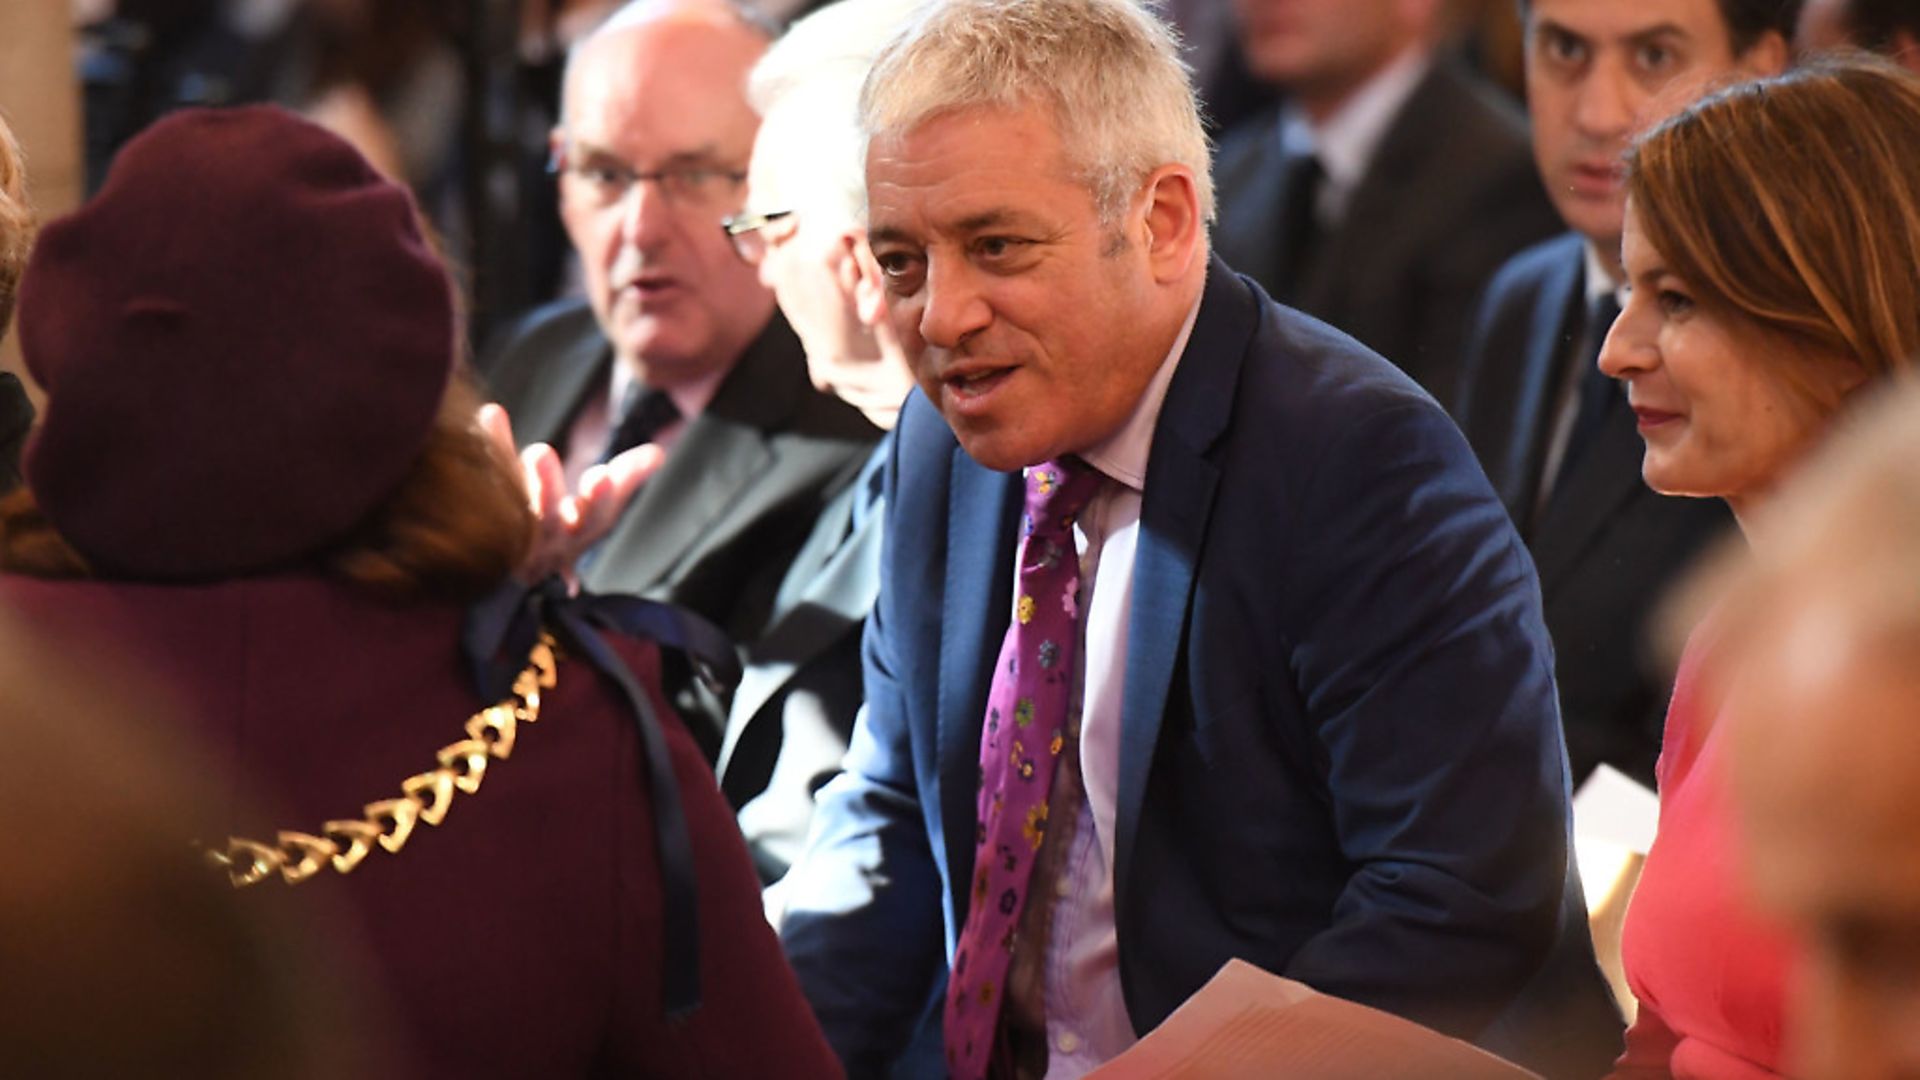 Former House of Commons speaker John Bercow.  Photo: Stefan Rousseau/ PA Wire/PA Images. - Credit: PA Wire/PA Images